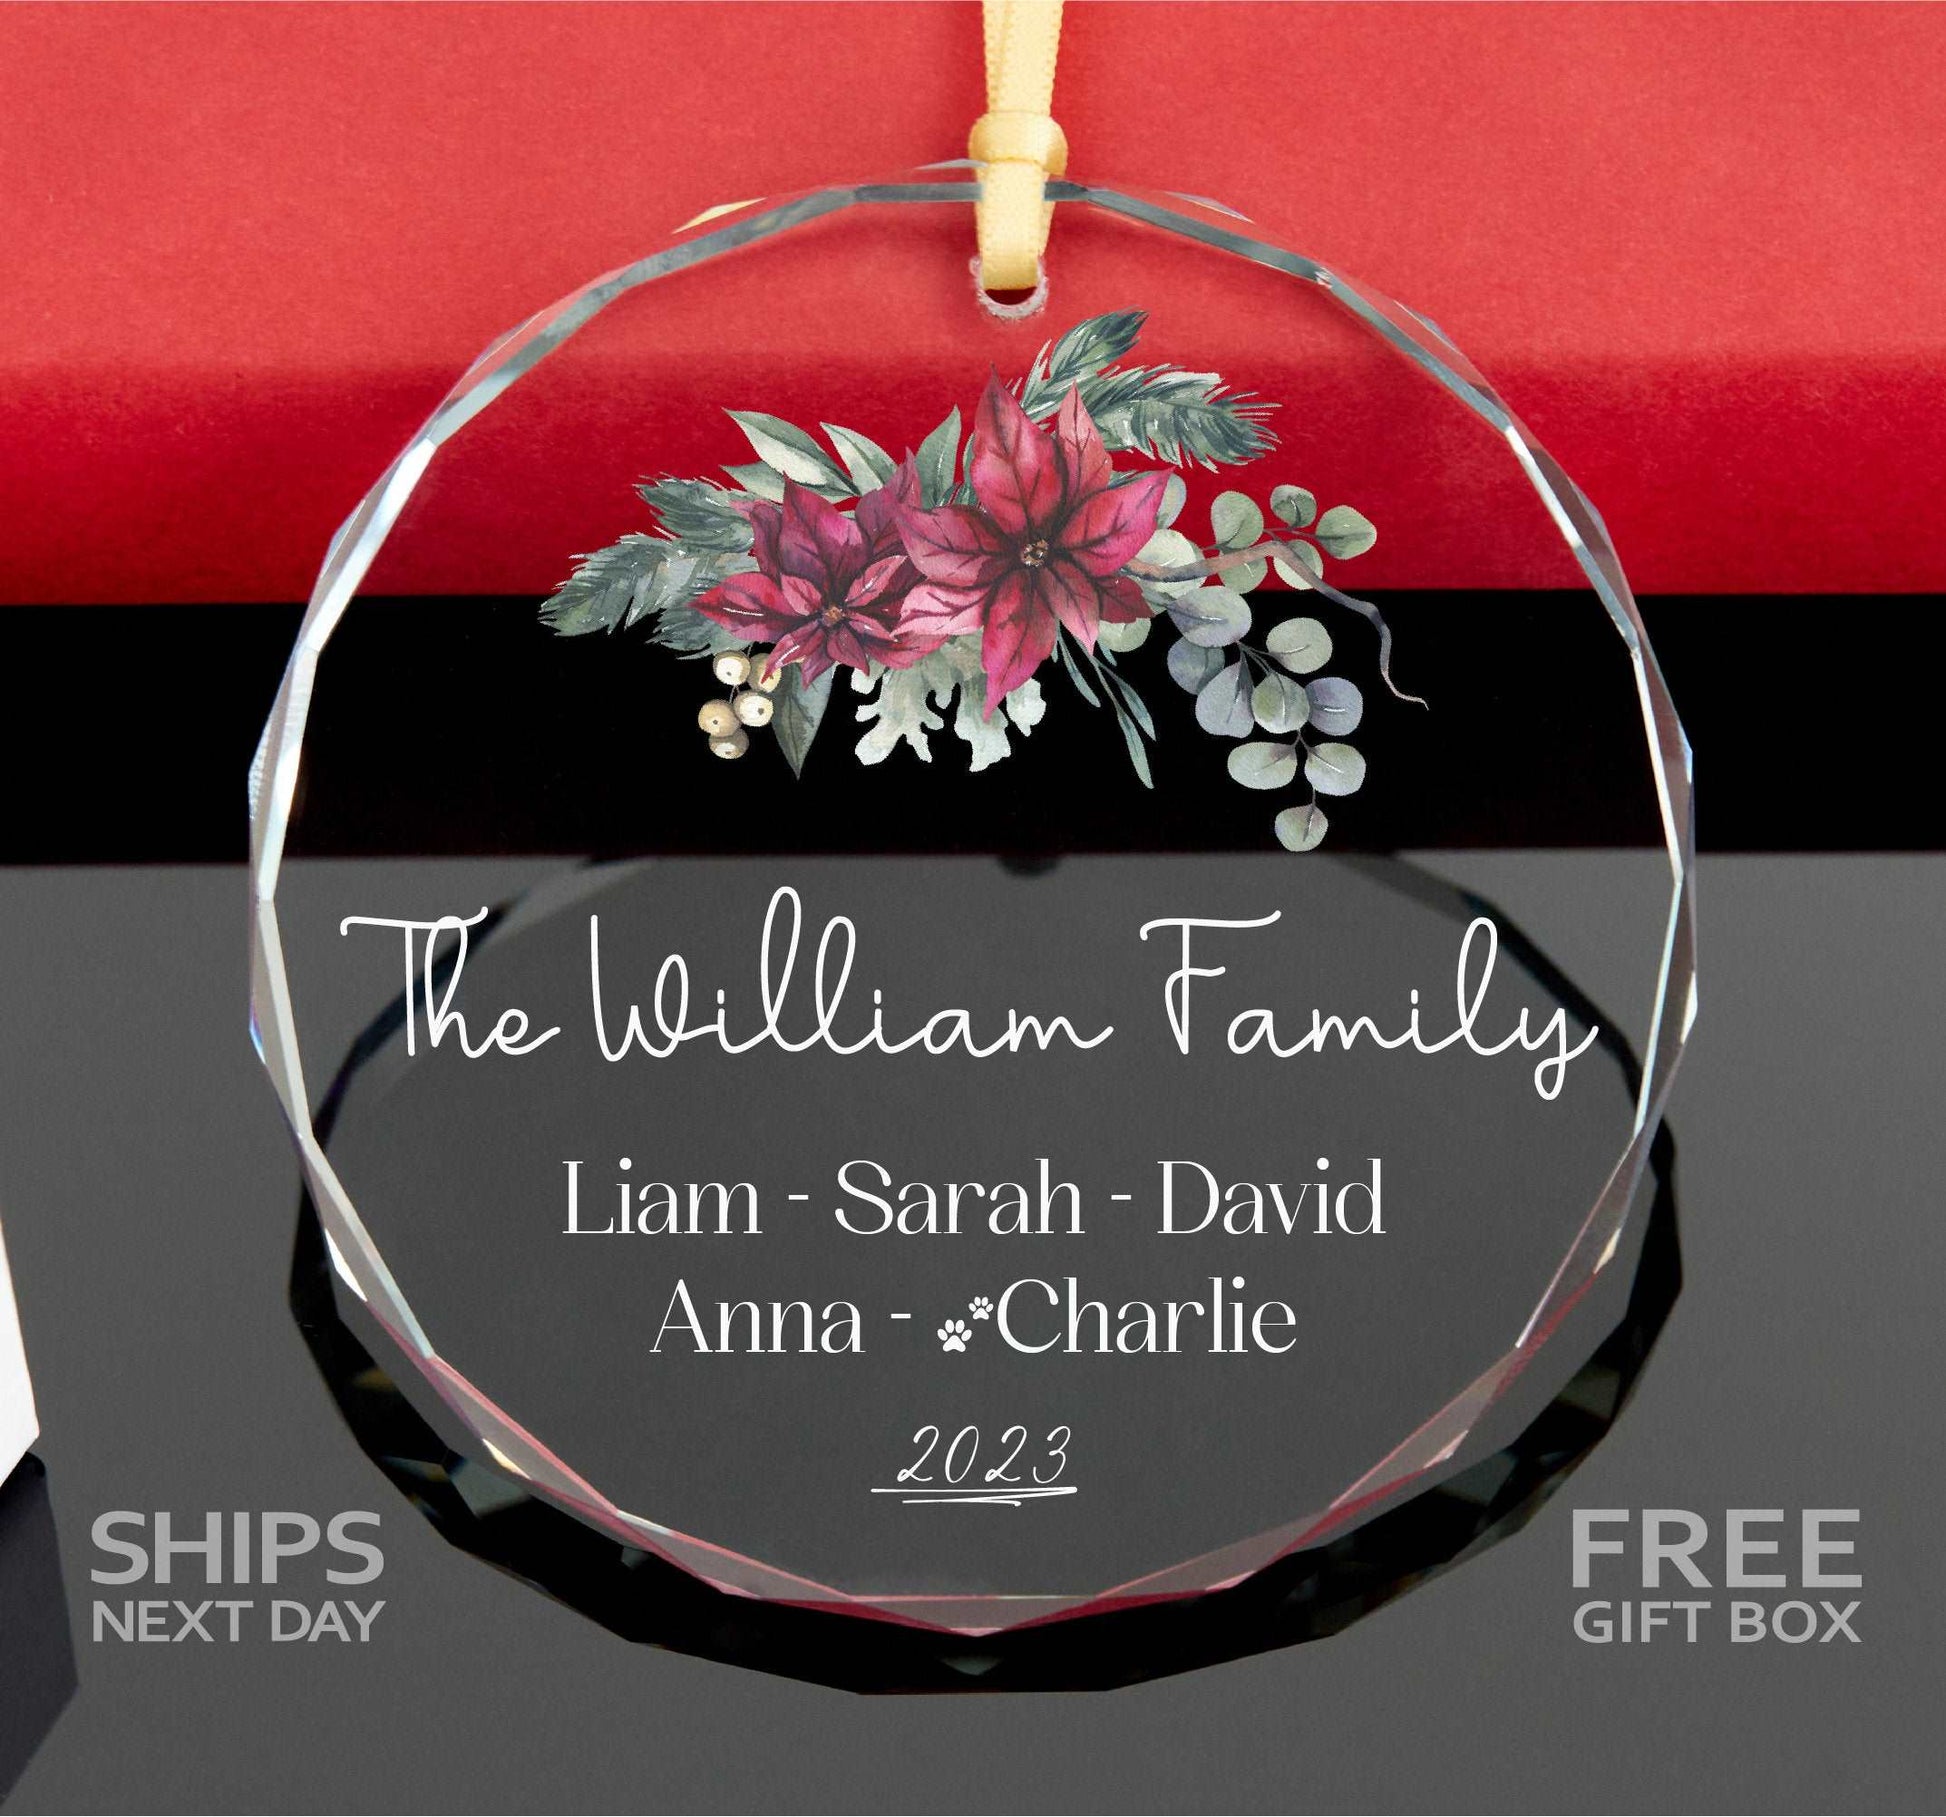 Personalized Family Ornament with Dog Names • 2023 Family Ornament • Custom Family Ornament with Pets 